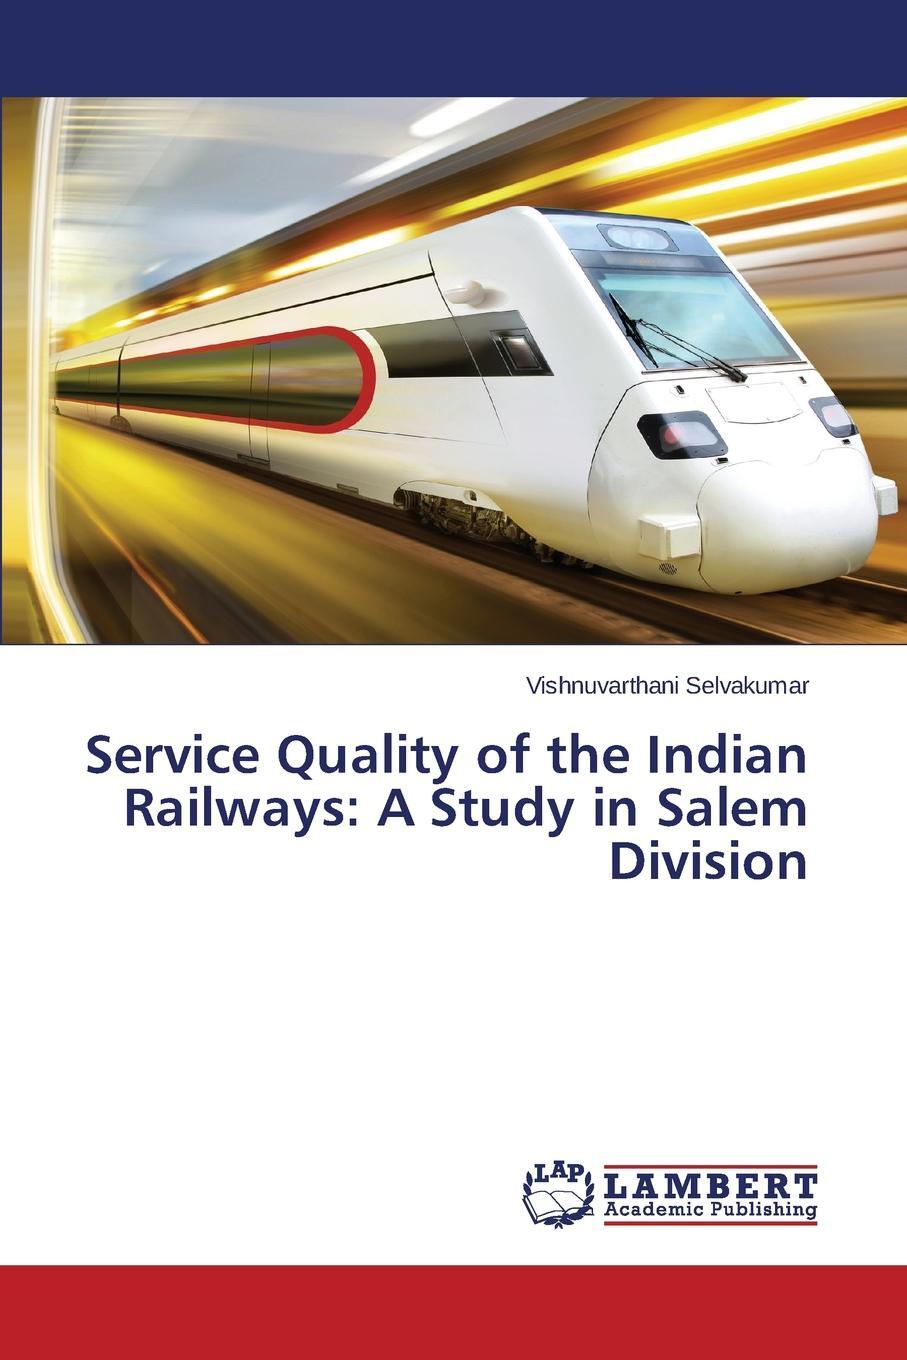 фото Service Quality of the Indian Railways. A Study in Salem Division